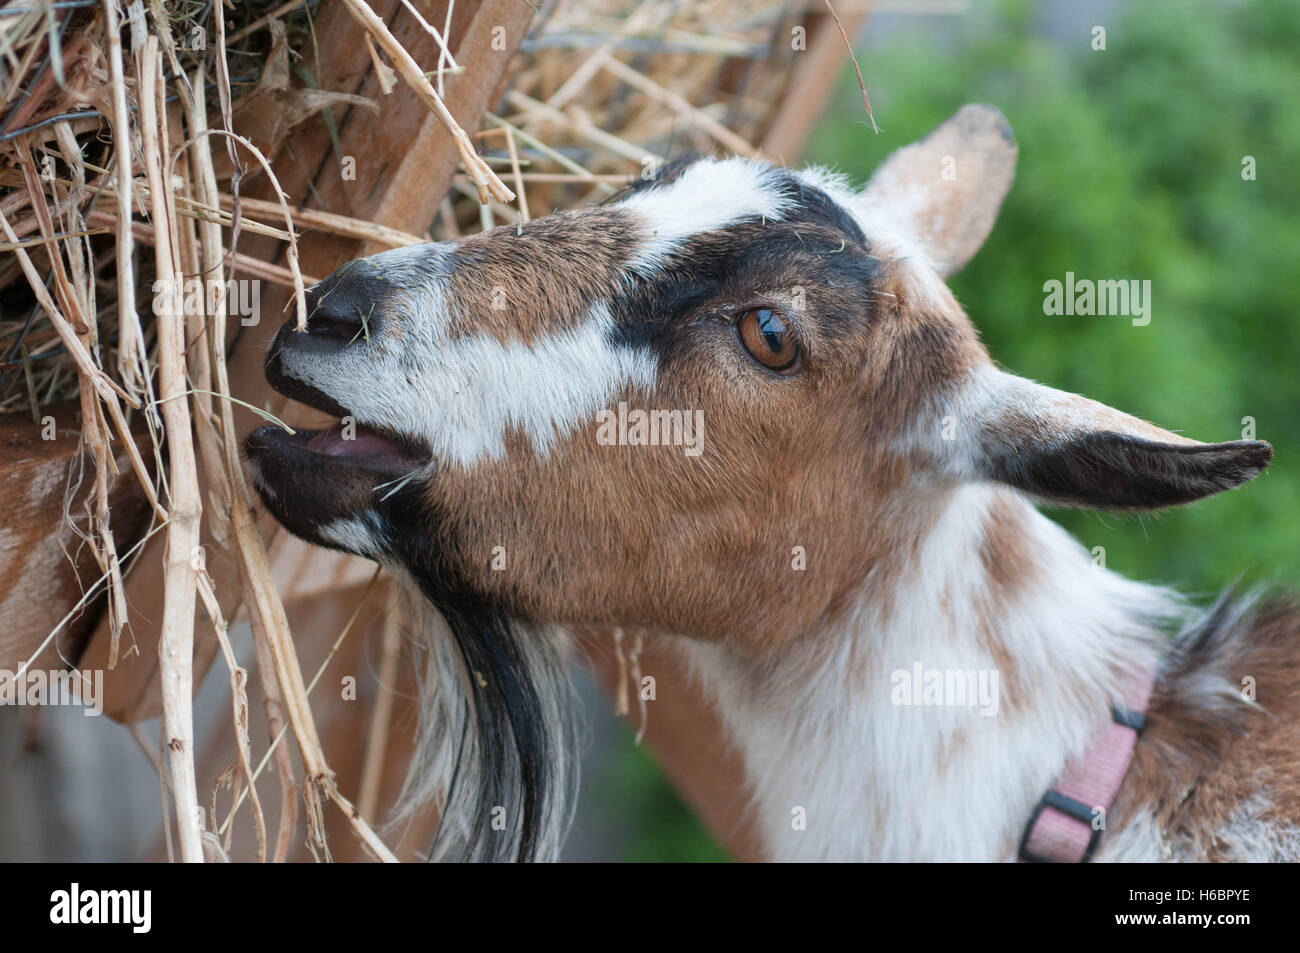 A juvenile goat eats hay from a feeder on a farm. Stock Photo